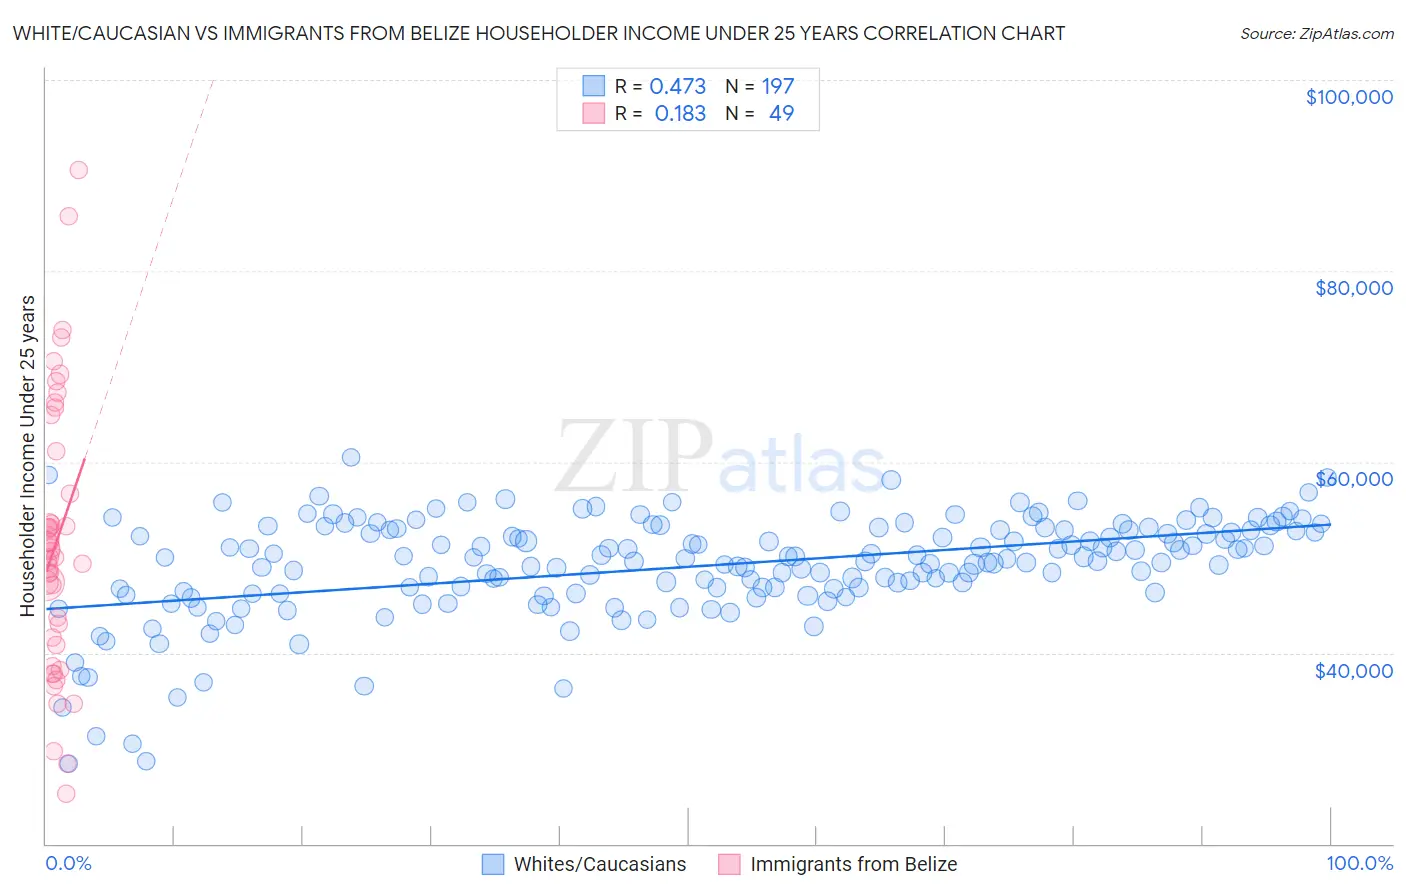 White/Caucasian vs Immigrants from Belize Householder Income Under 25 years